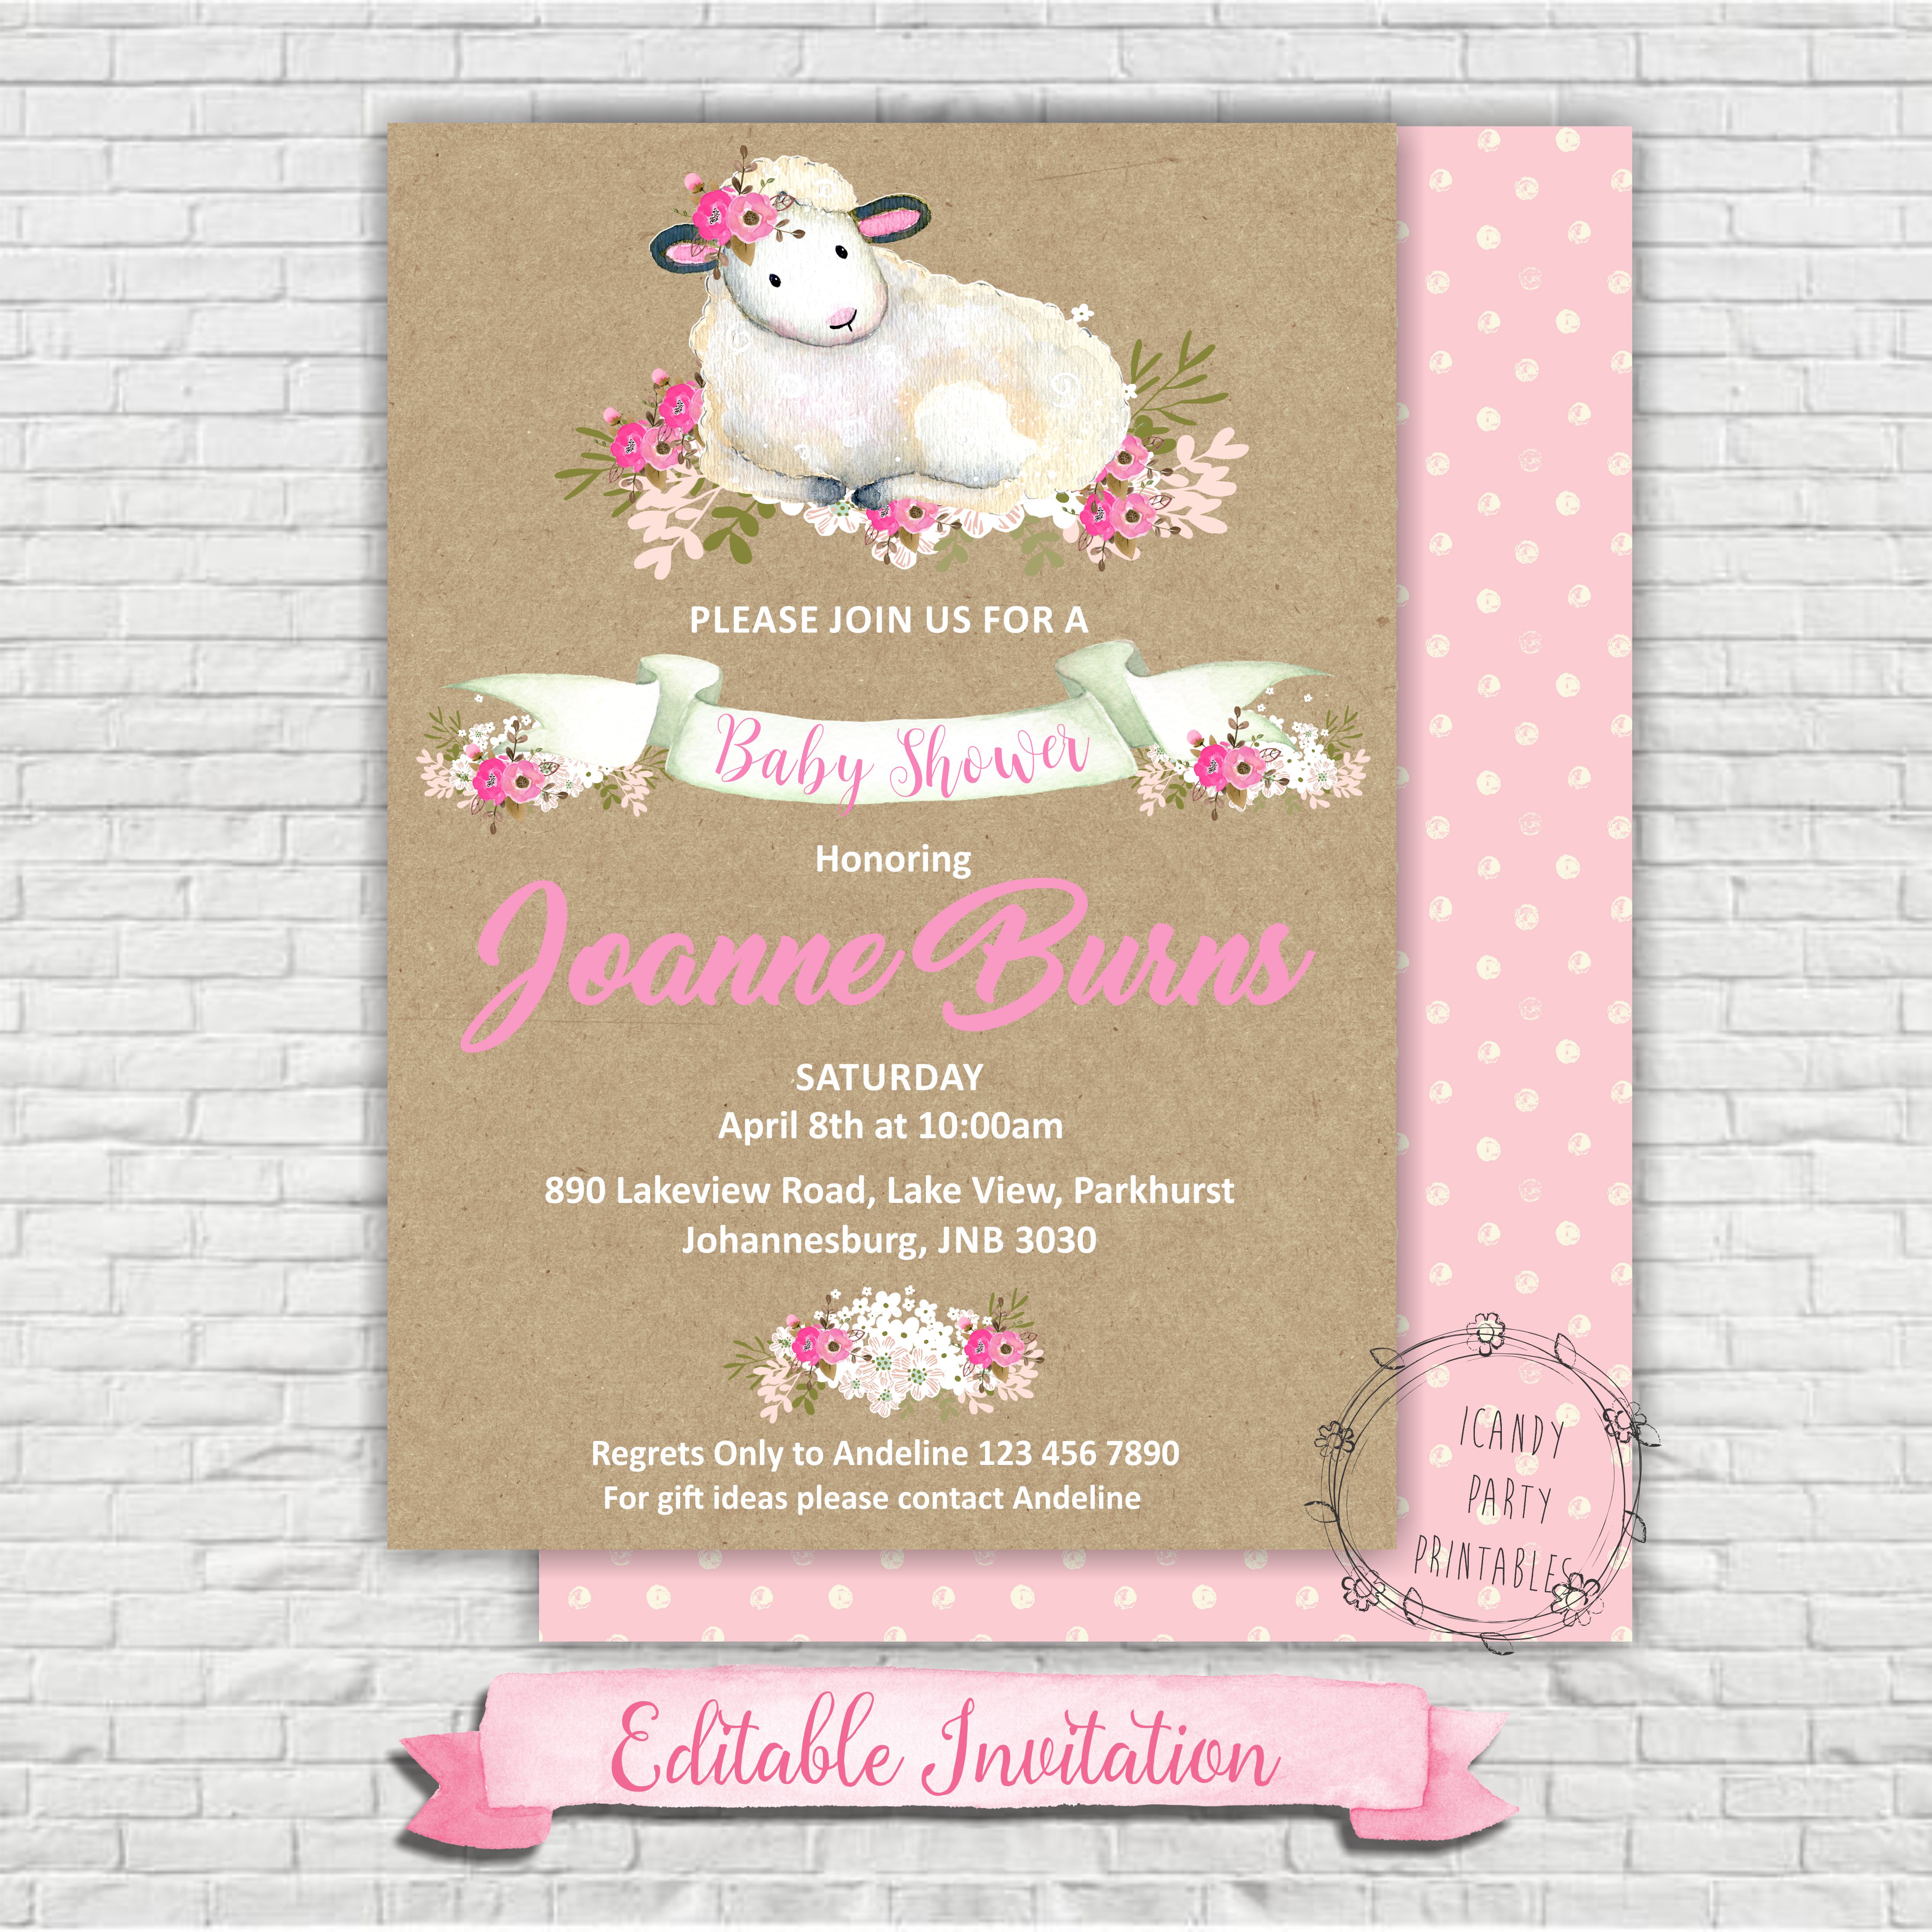 Full Size of Baby Shower:cheap Invitations Baby Shower Pinterest Baby Shower Ideas For Girls Baby Girl Themed Showers Pinterest Nursery Ideas Baby Shower Card Message Ideas Baby Girl Party Plates Baby Shower Invitations Baby Shower Favors